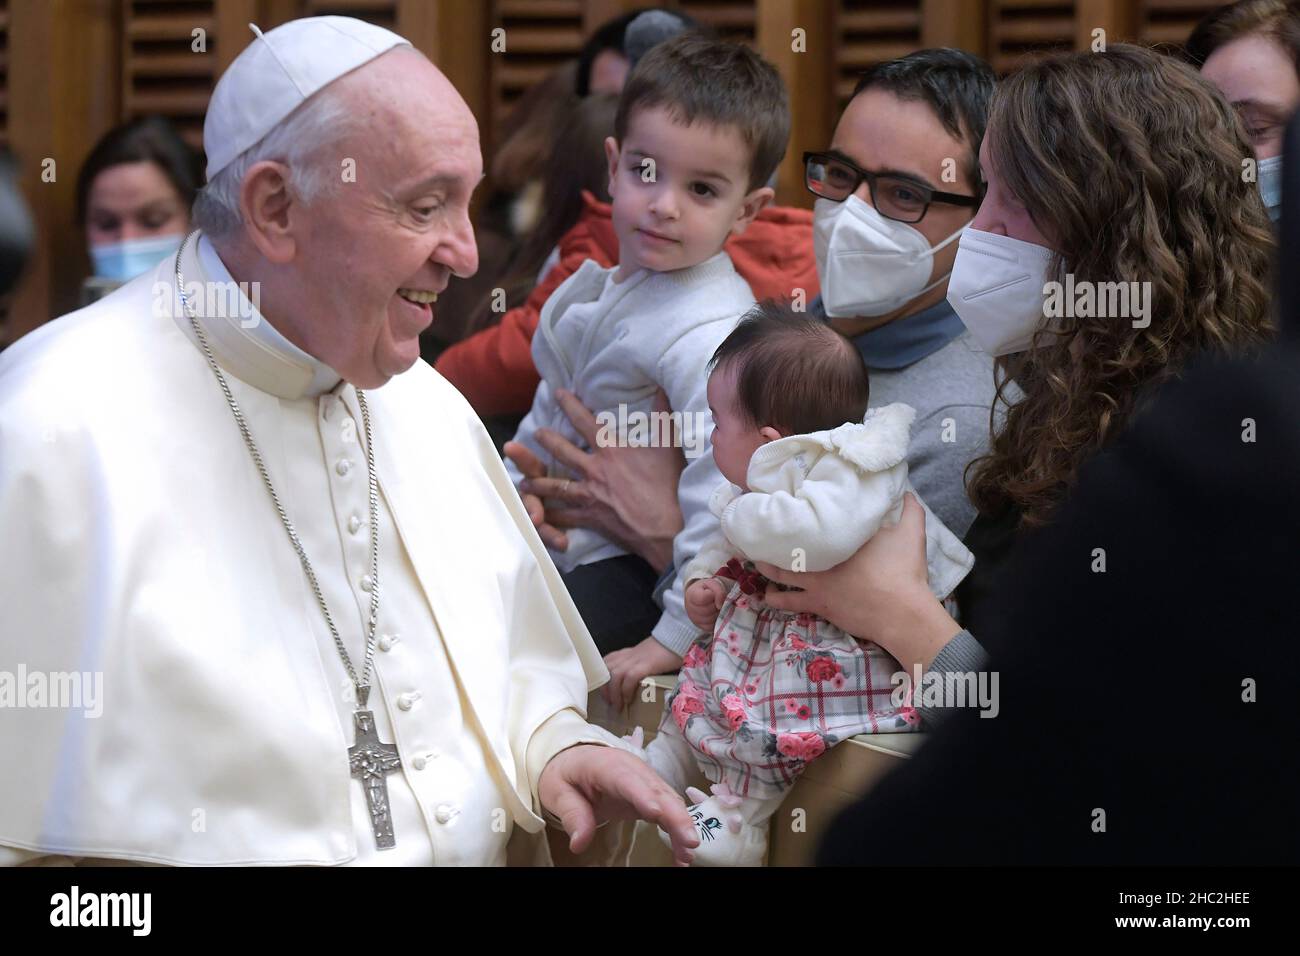 Vatican City, Italy. 23rd Dec, 2021. Pope Francis greets a child during an audience with Vatican employees and their families for the Christmas greetings in the Paul VI Hall at the Vatican on December 23, 2021. RESTRICTED TO EDITORIAL USE - Vatican Media/Spaziani. Credit: dpa/Alamy Live News Stock Photo